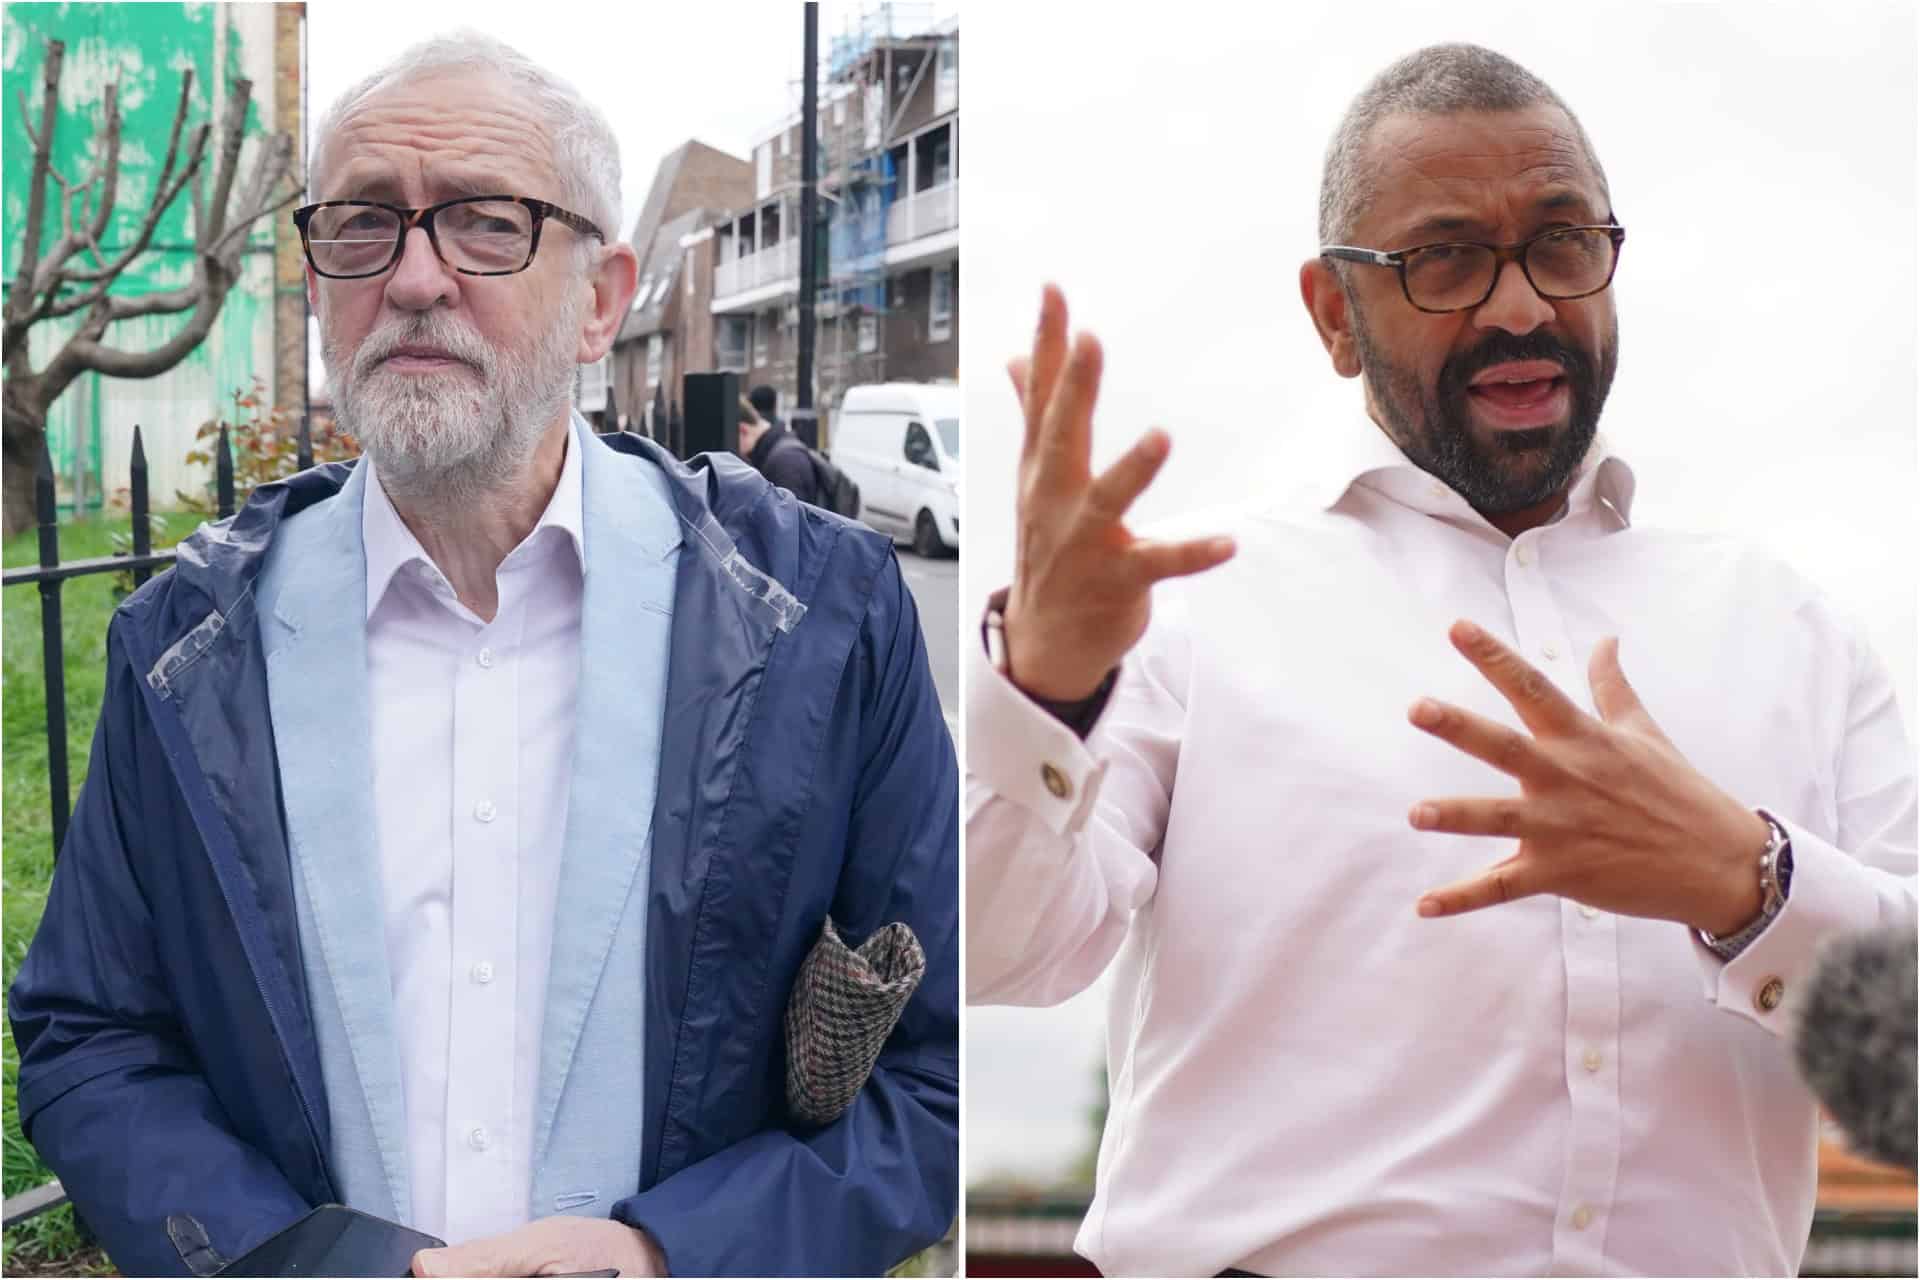 James Cleverly reminded of Corbyn tweet as he blasts Farage attack